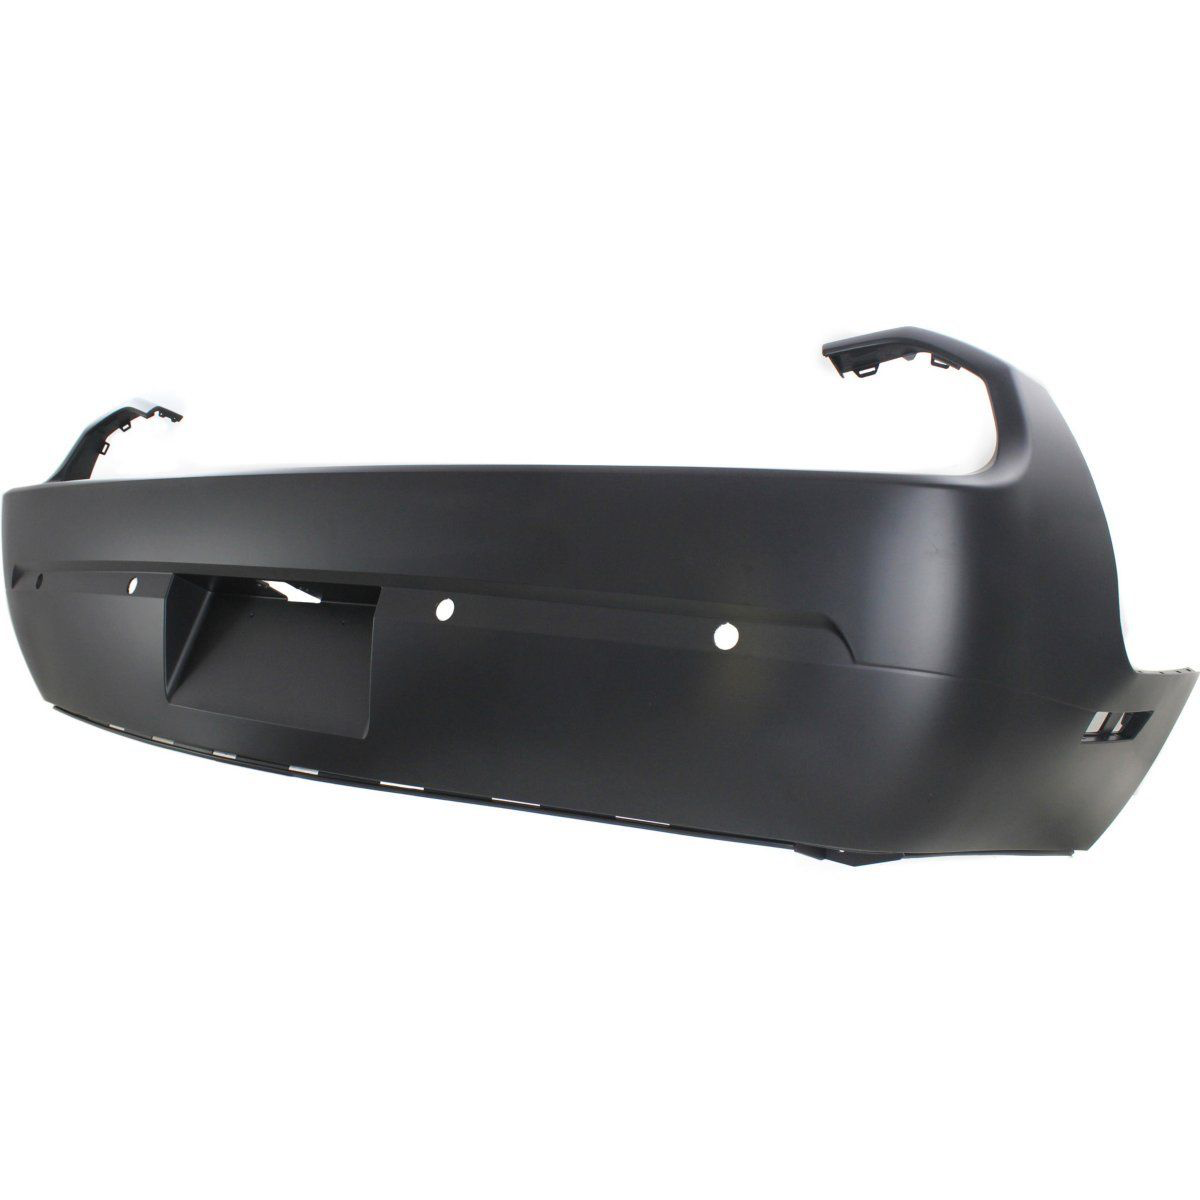 2012-2014 DODGE CHALLENGER Rear Bumper Cover w/Parking Sensor Holes Painted to Match